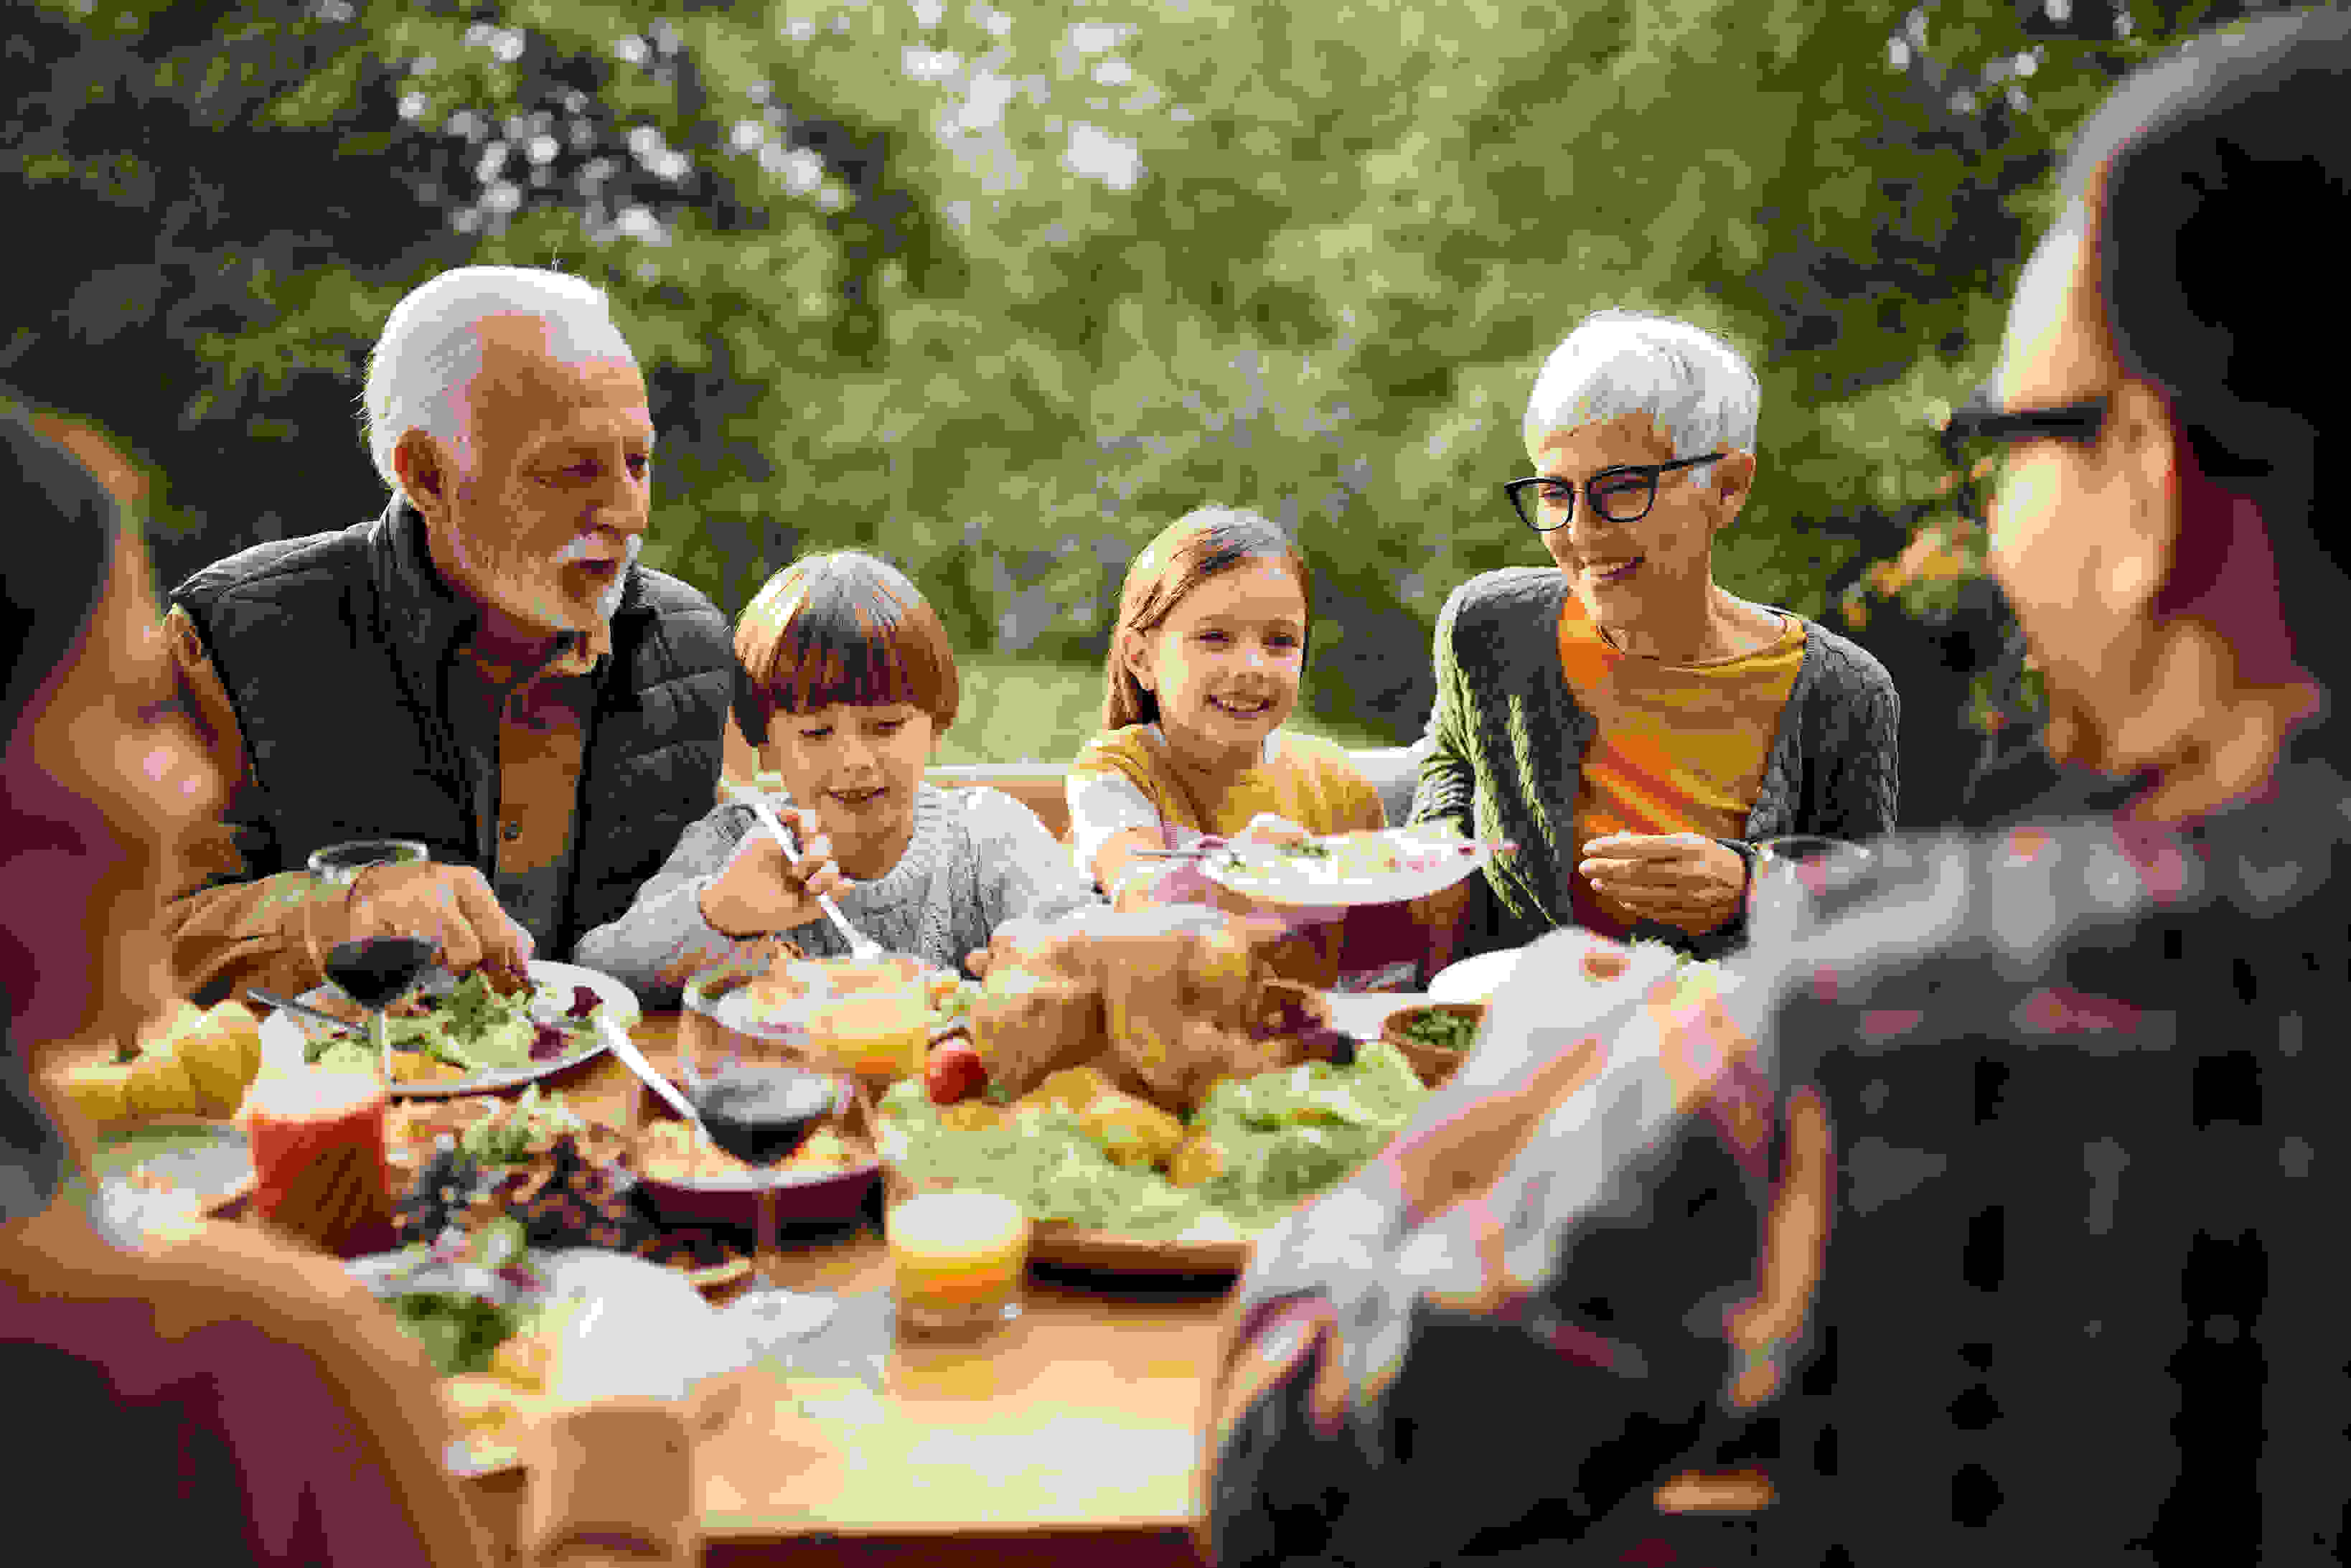 Older couple enjoying a meal with their grandchildren outdoors